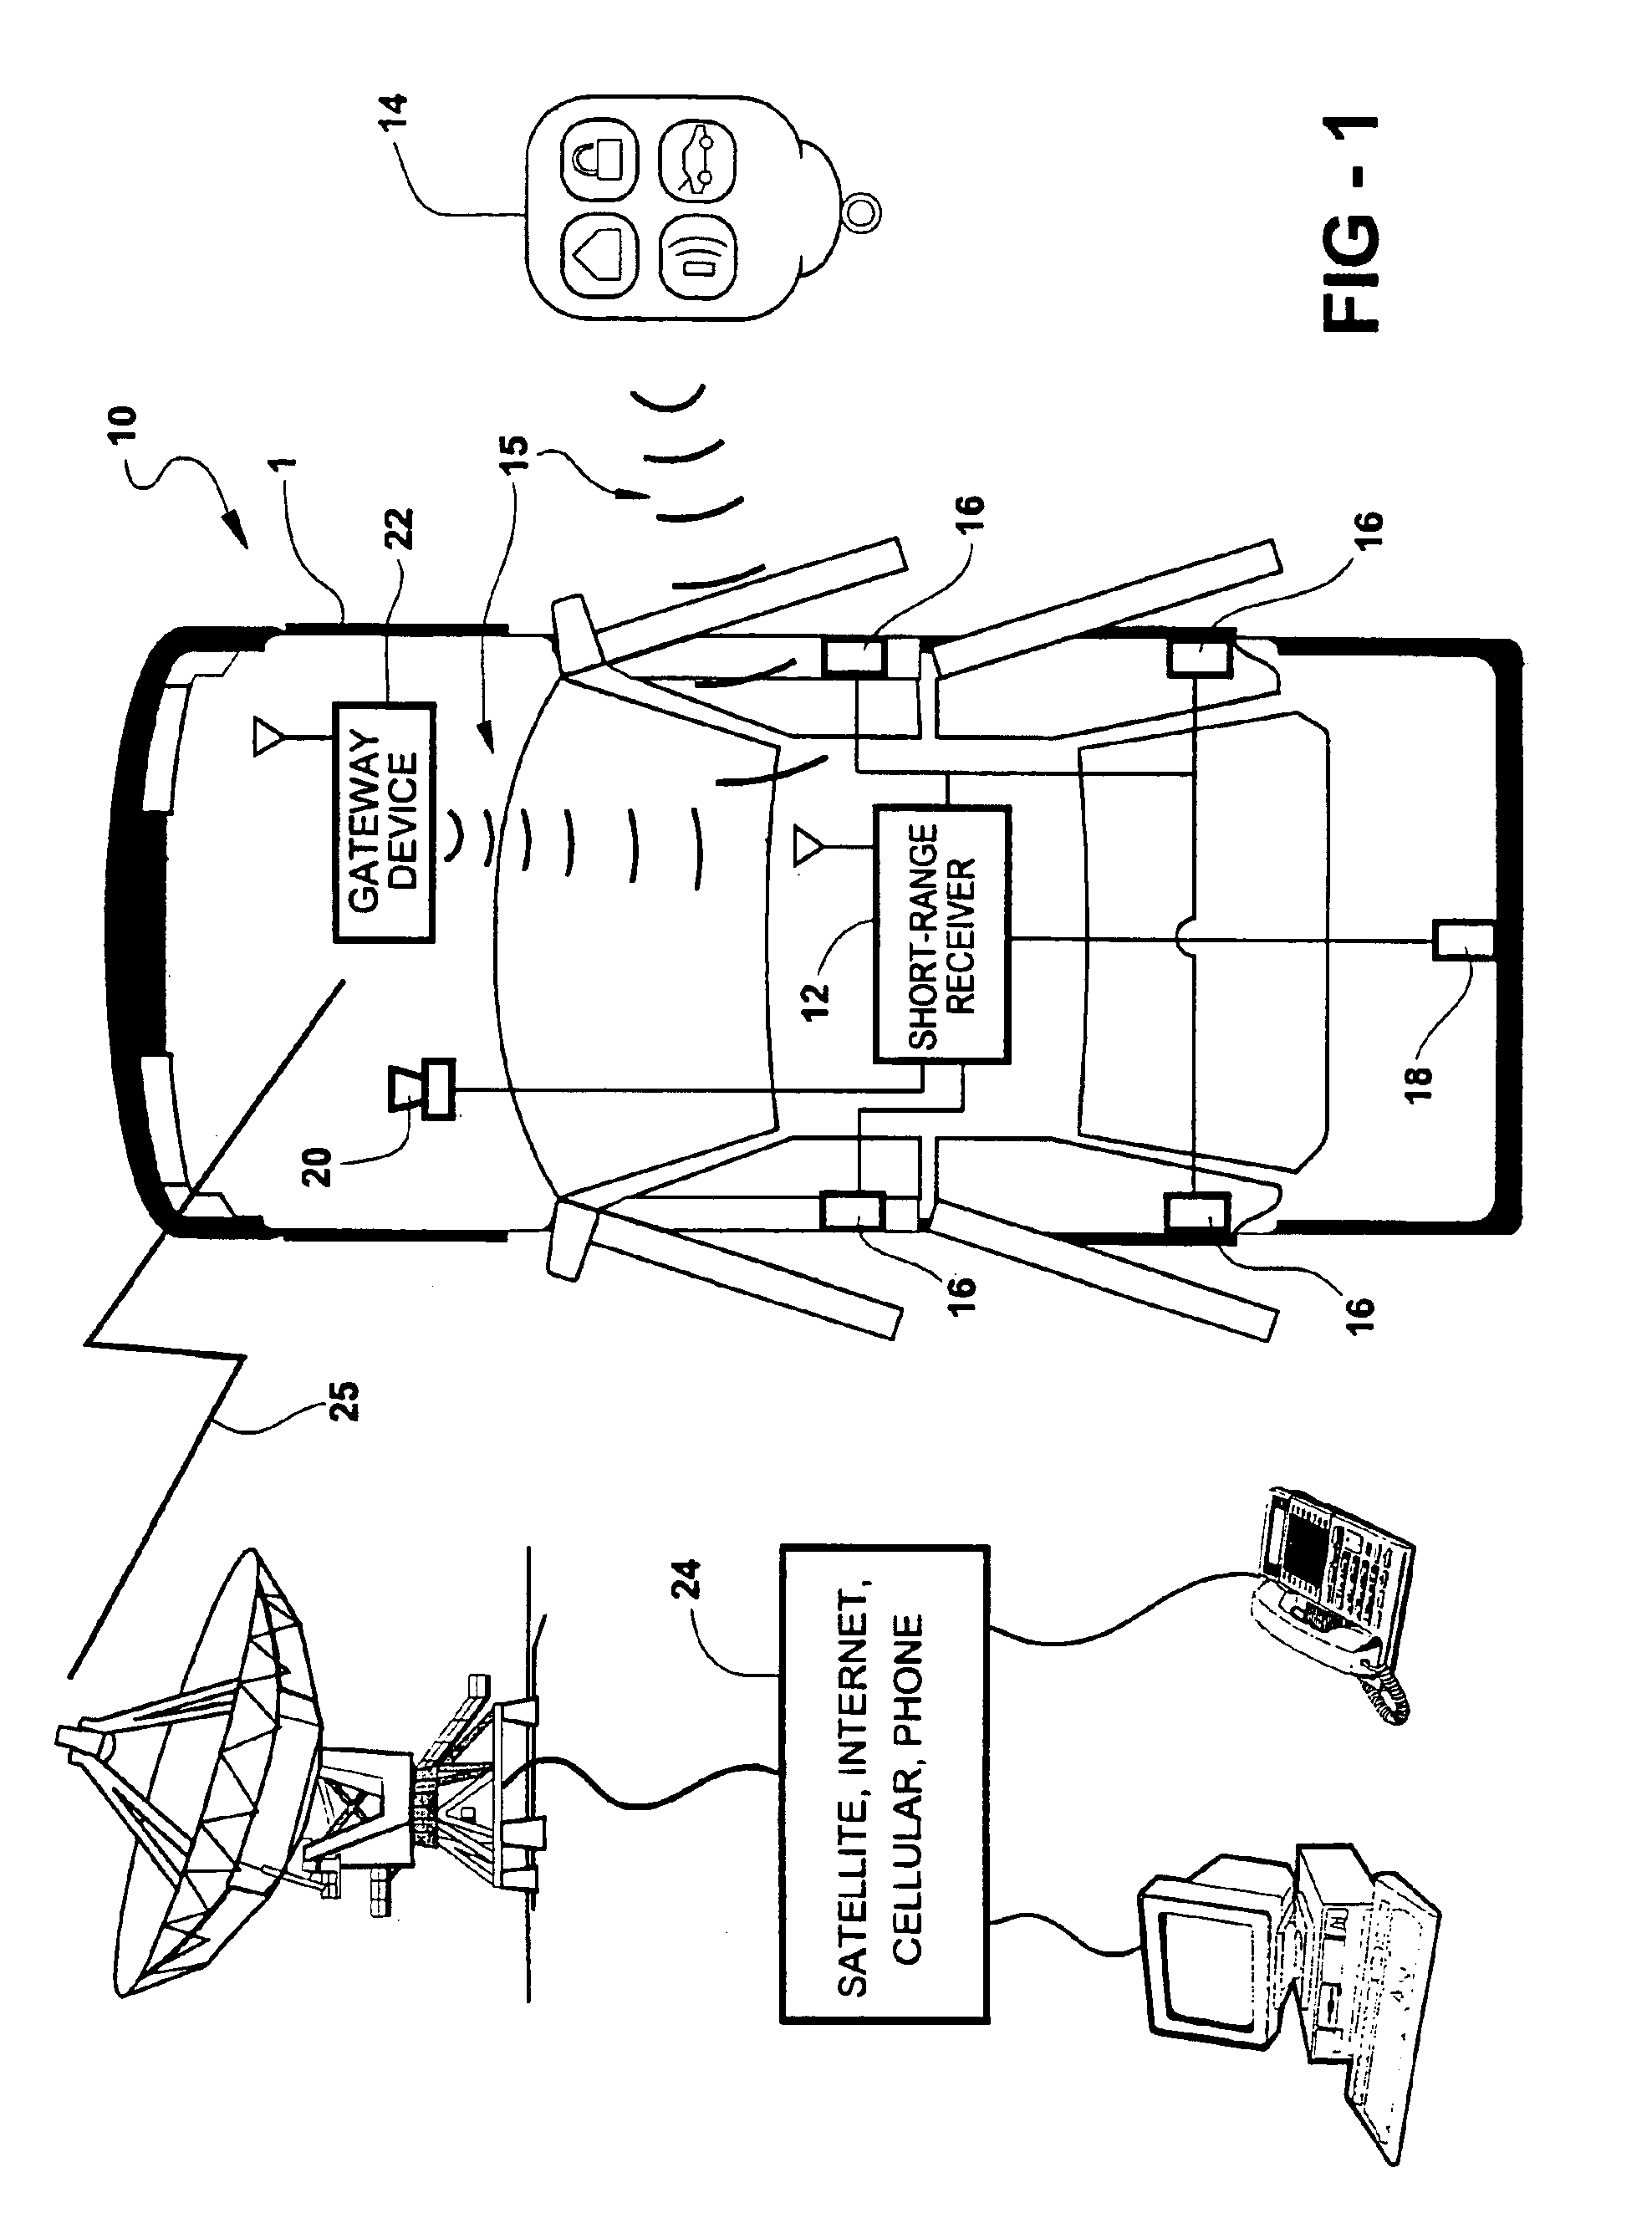 Remote control system for operating selected functions of a vehicle